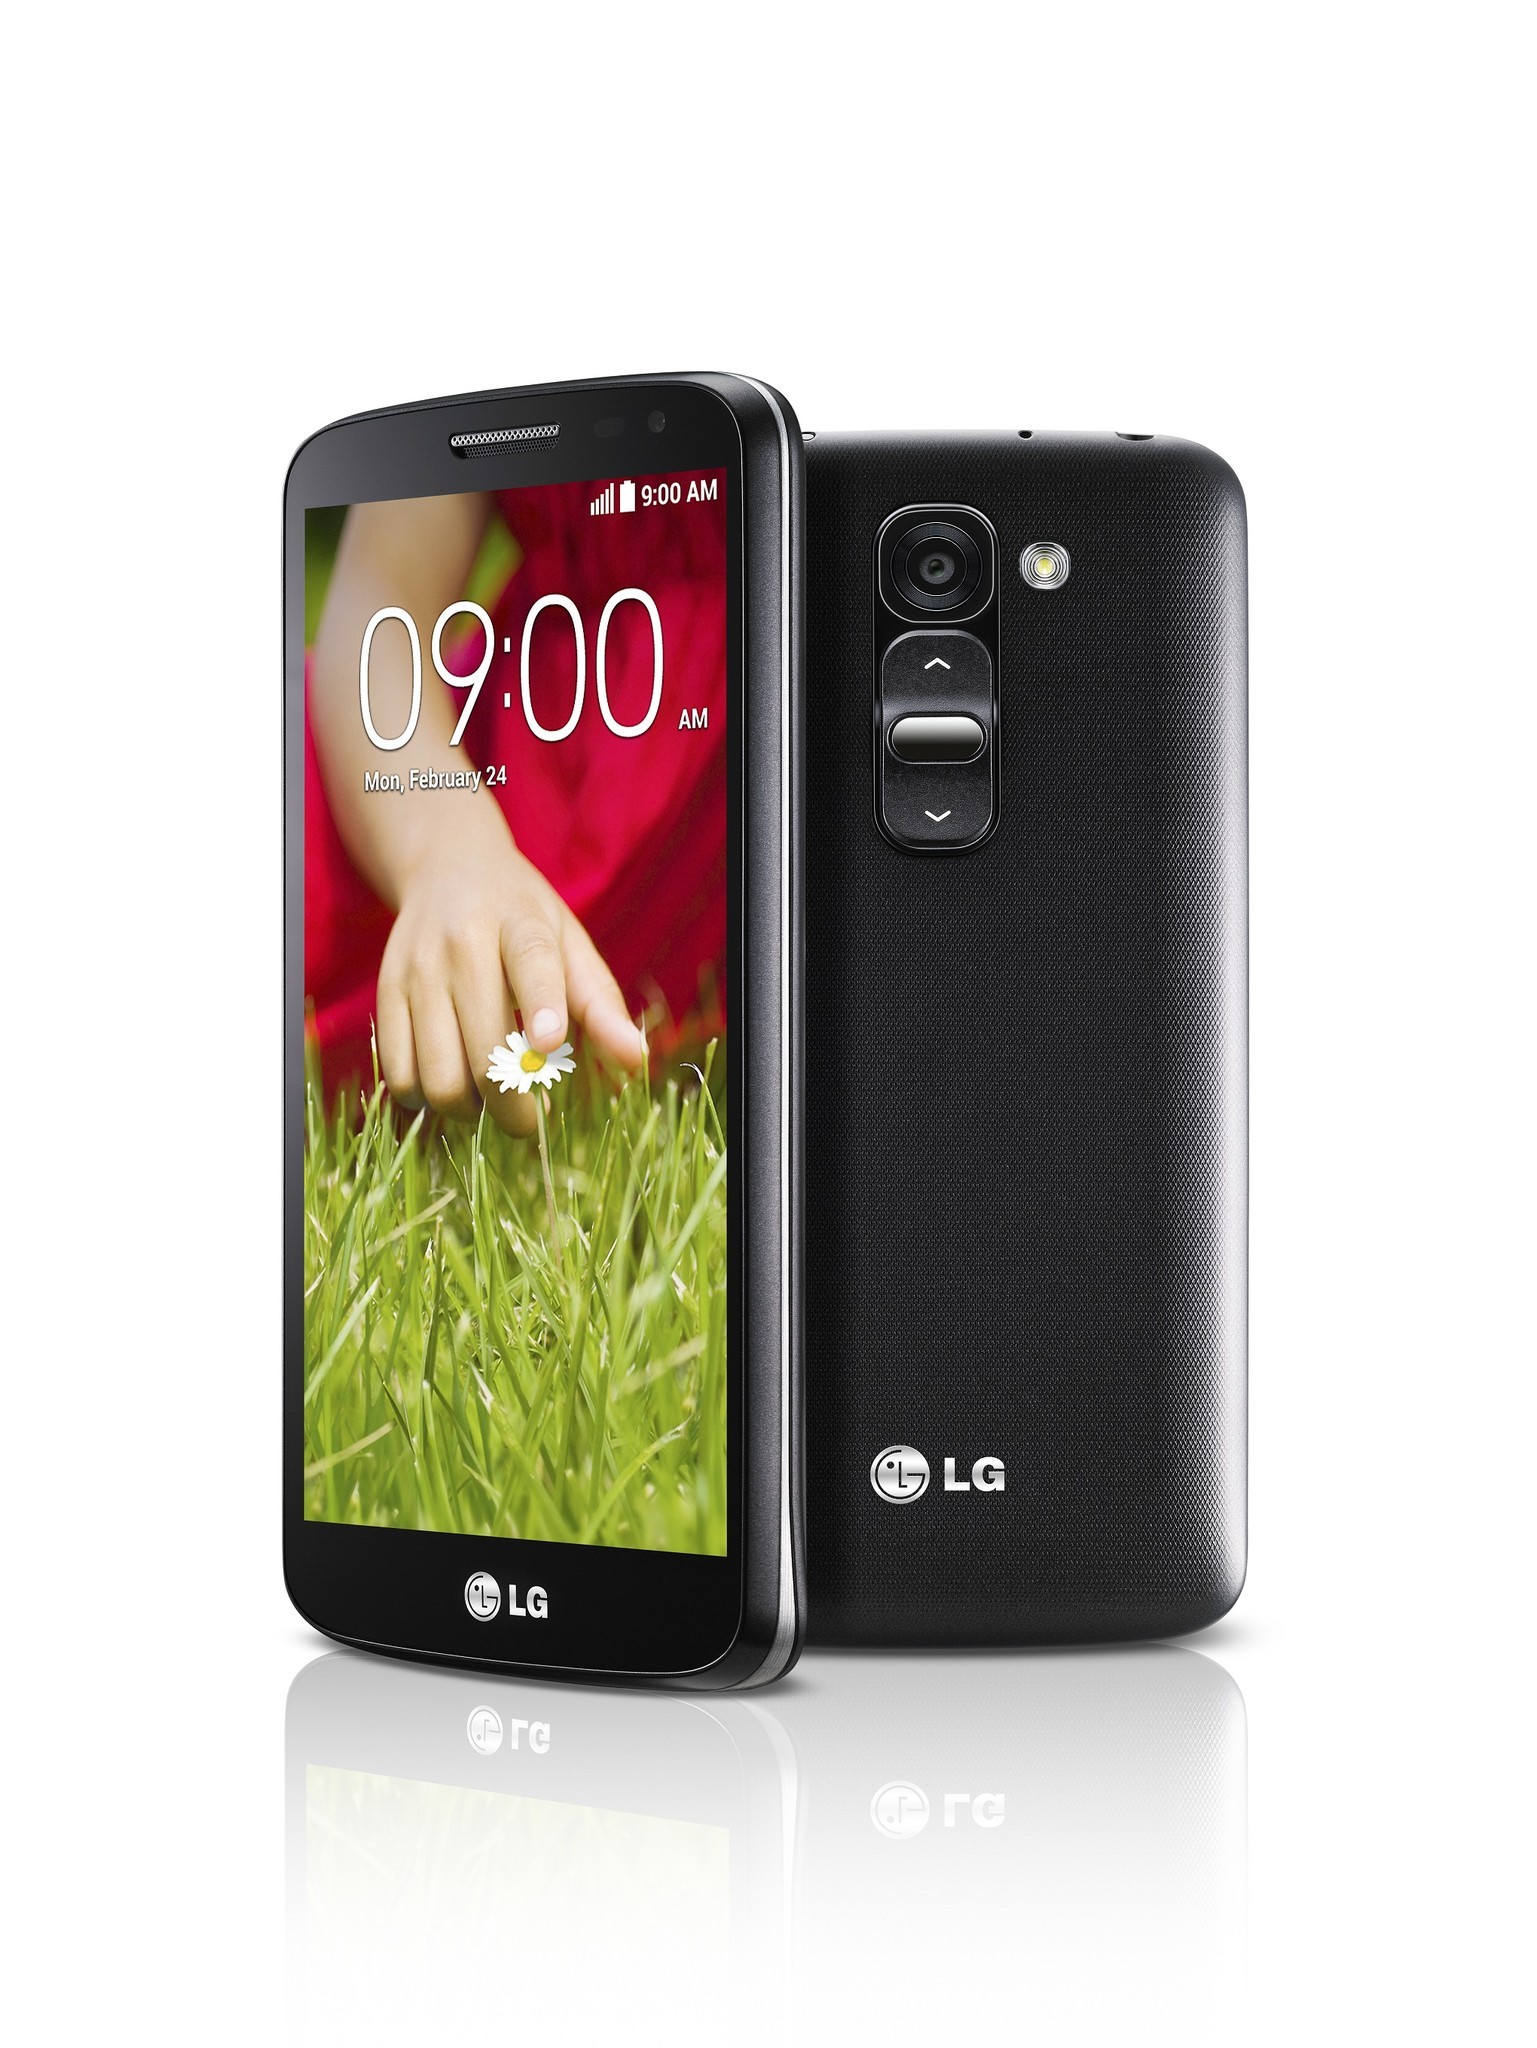 Smart to further expand smartphone user base with new LG G2 Mini LTE offer